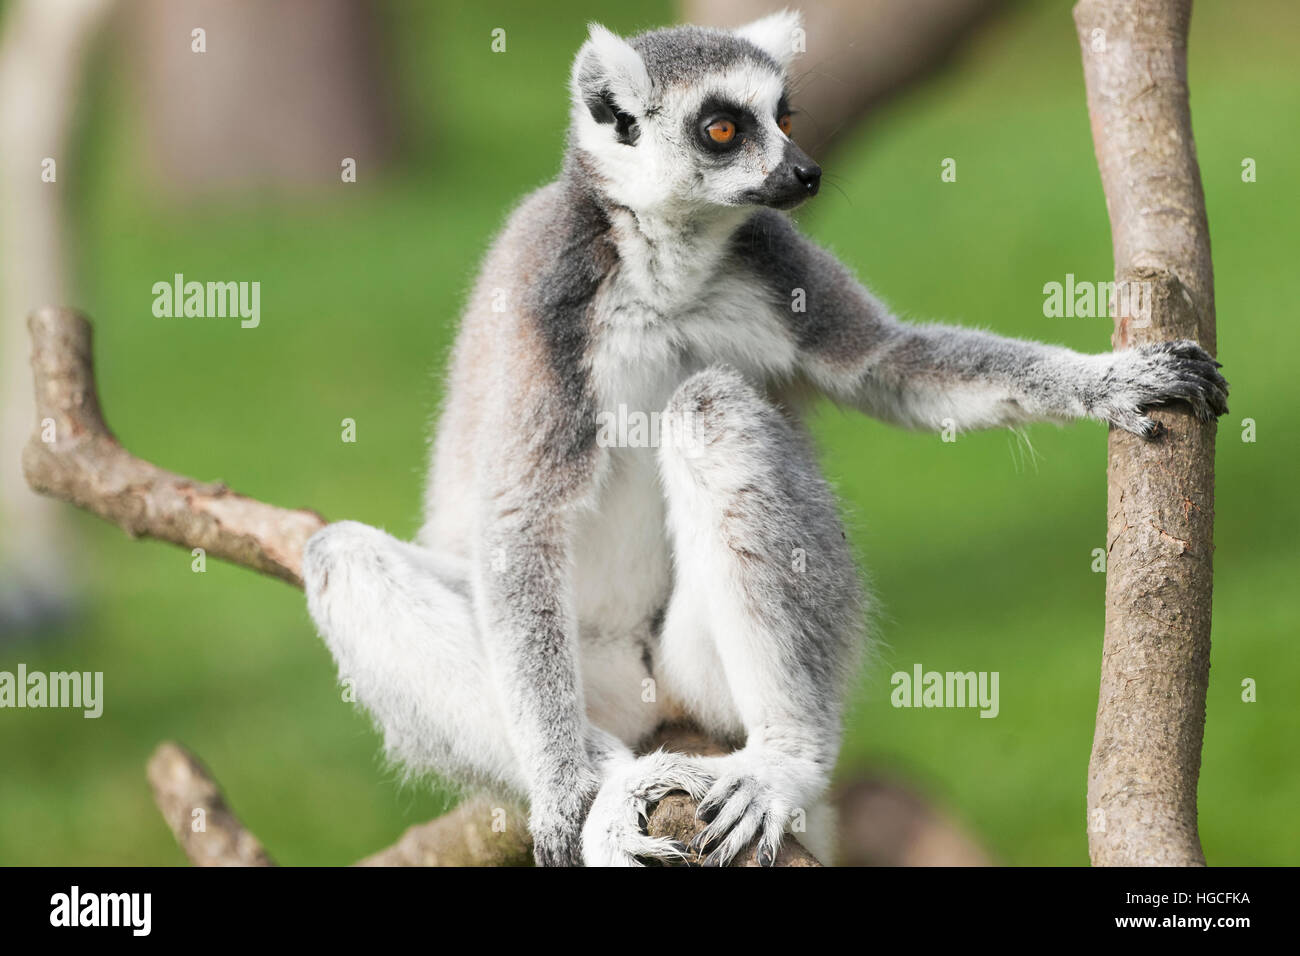 spannend ruimte Rose kleur Ring-tailed lemur They are highly social living in large groups lead by a  dominant female. Conservation status Endangered Stock Photo - Alamy